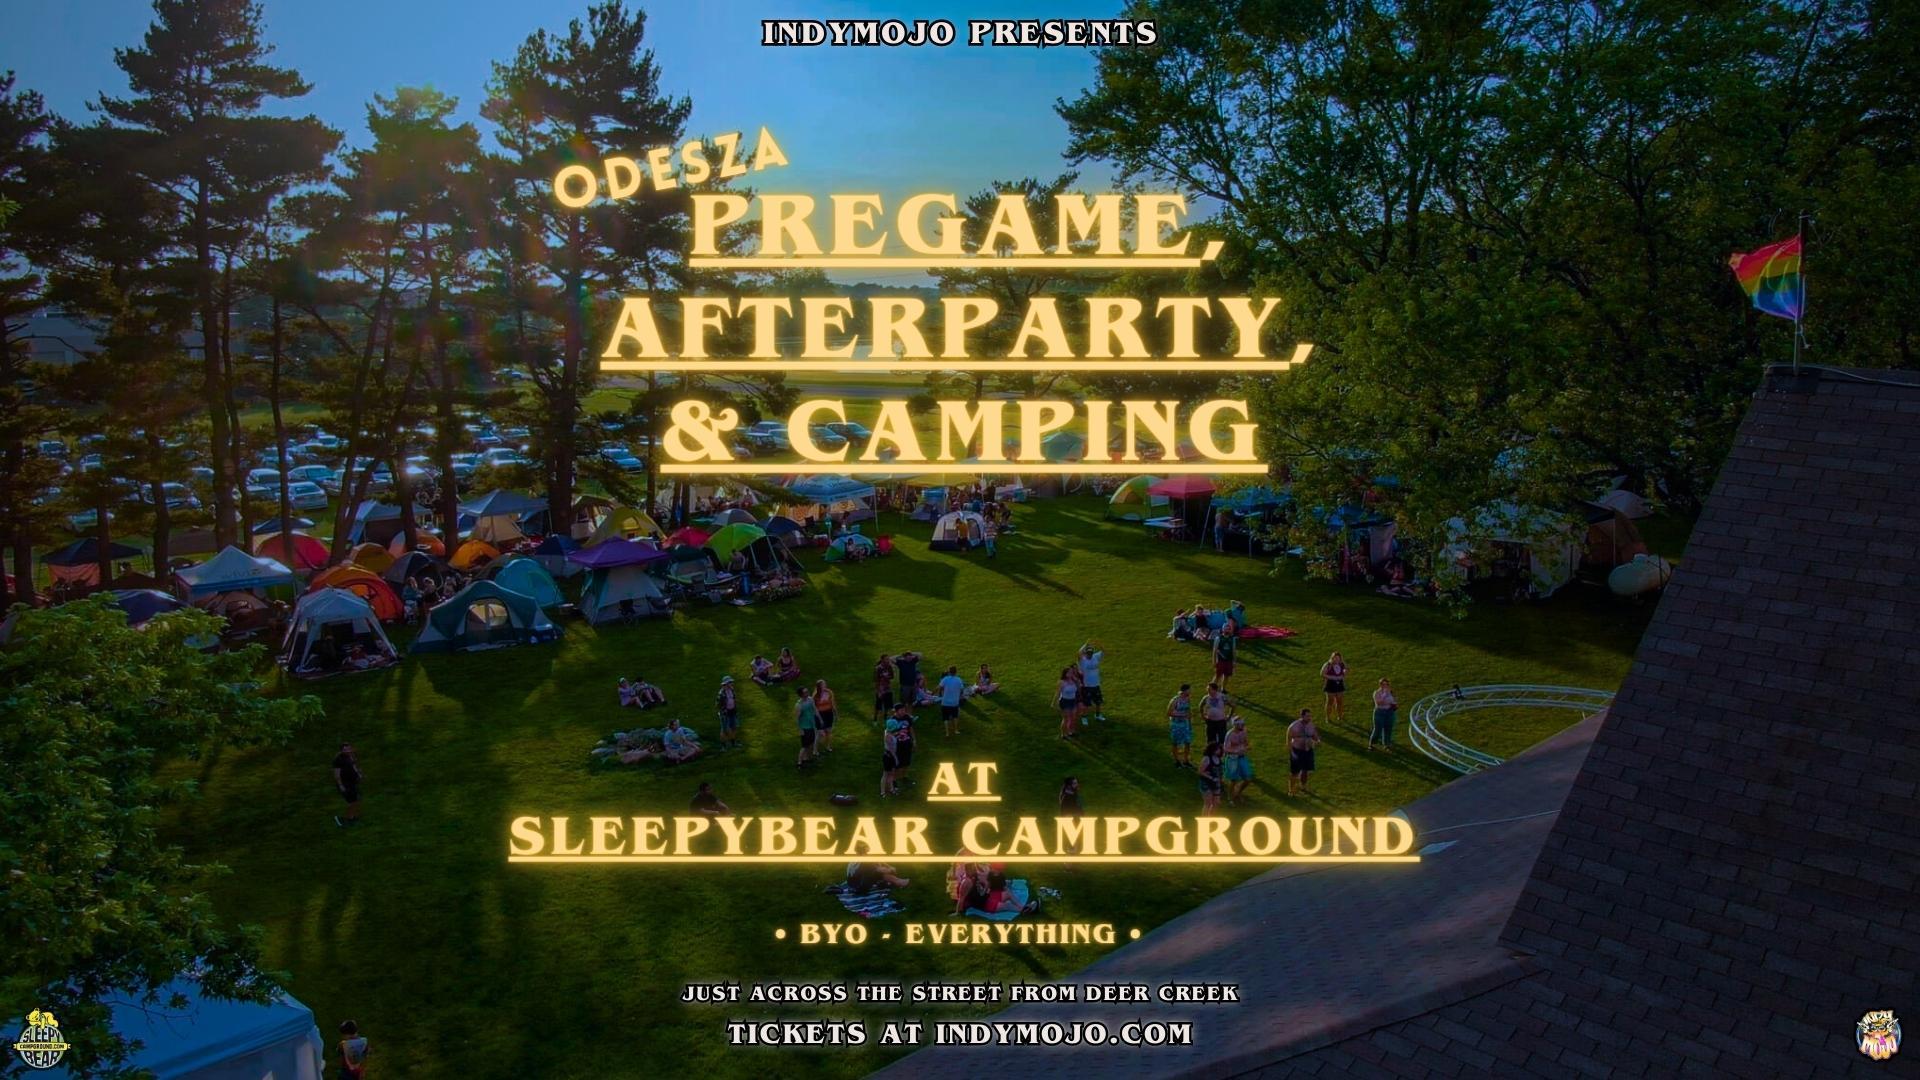 ODESZA – Camping w/ Late Night After Party at Sleepybear Campground